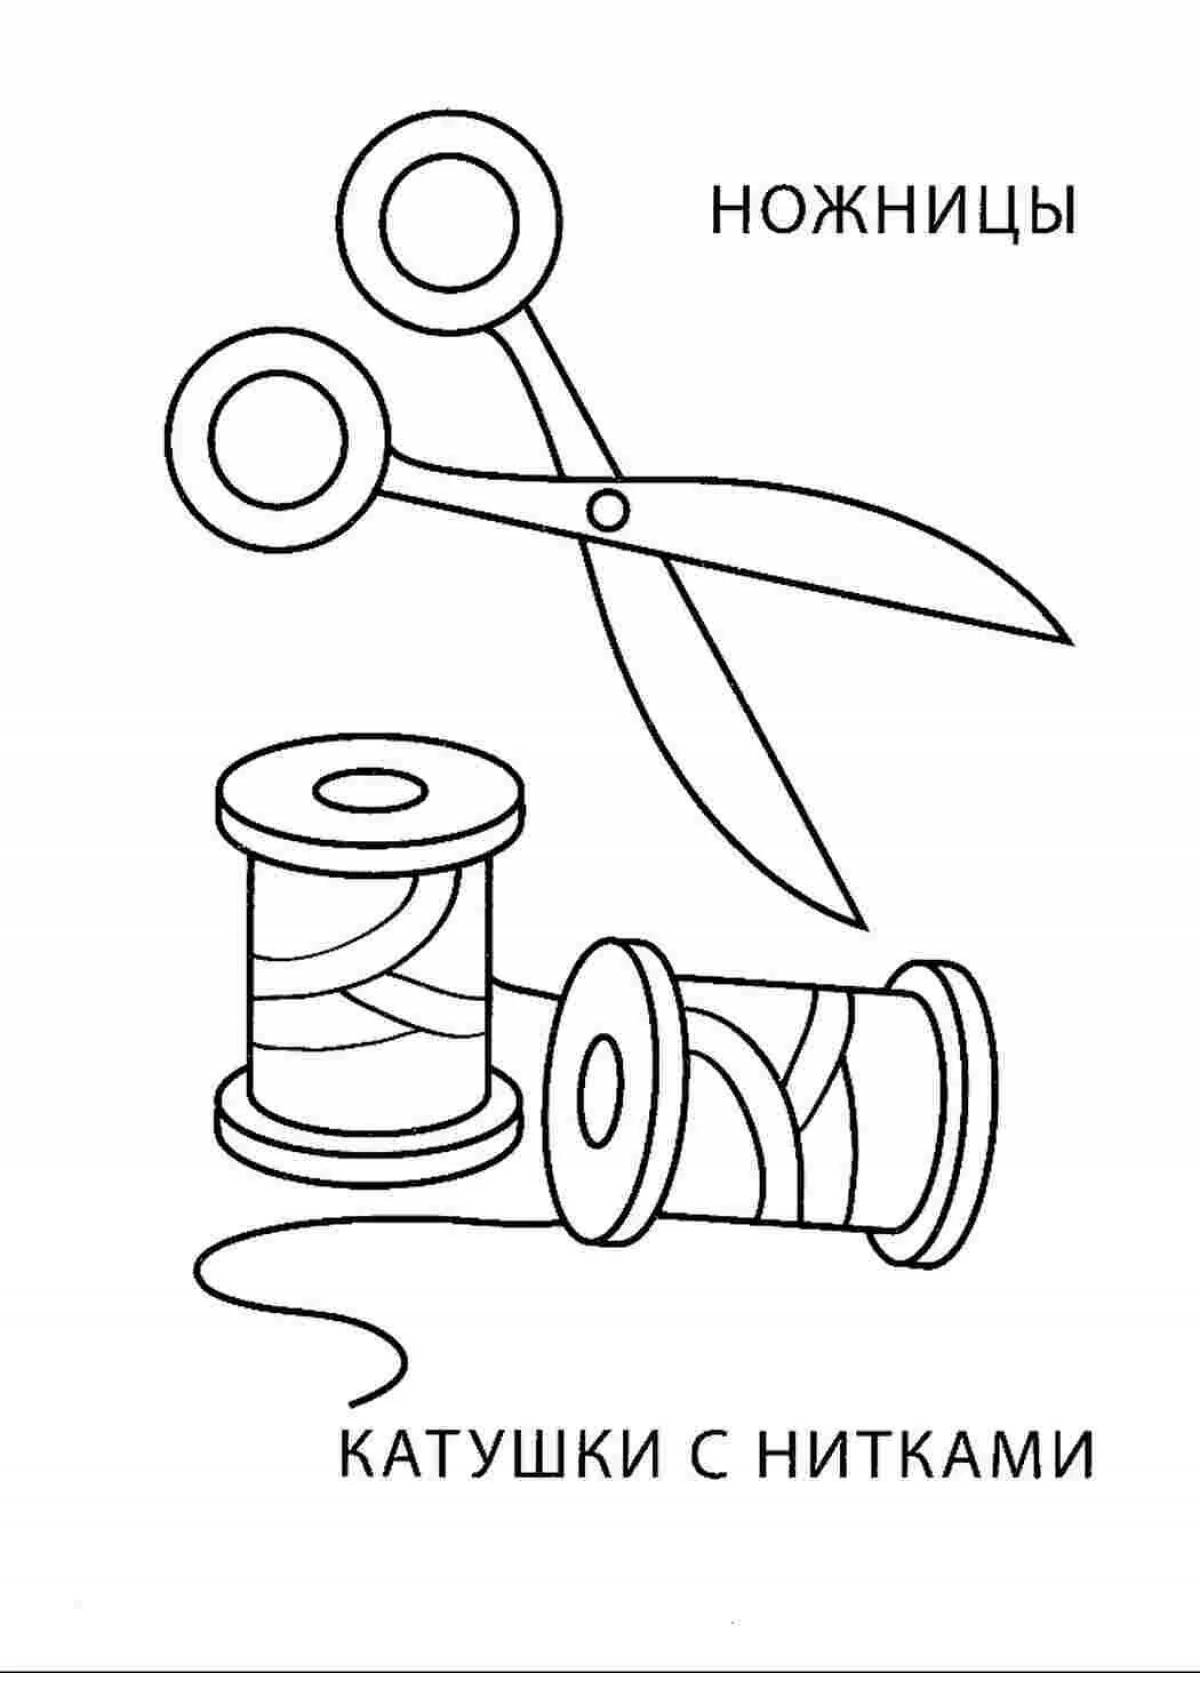 Adorable scissors coloring book for kids